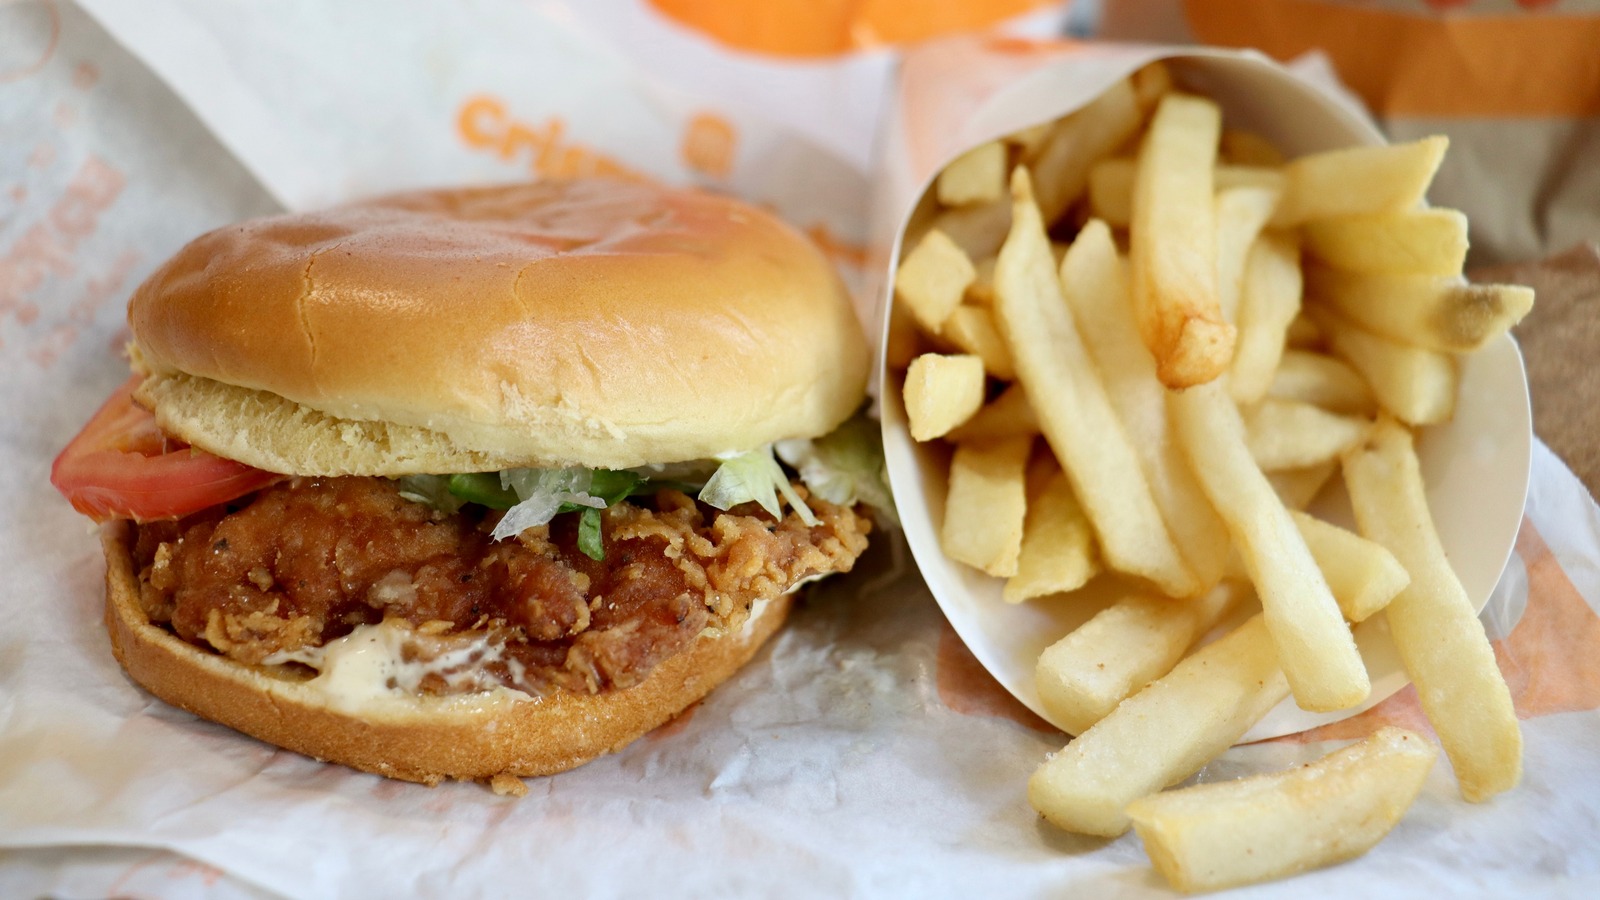 Burger King's Royal Crispy Chicken Sandwich Is Getting An Italian Makeover